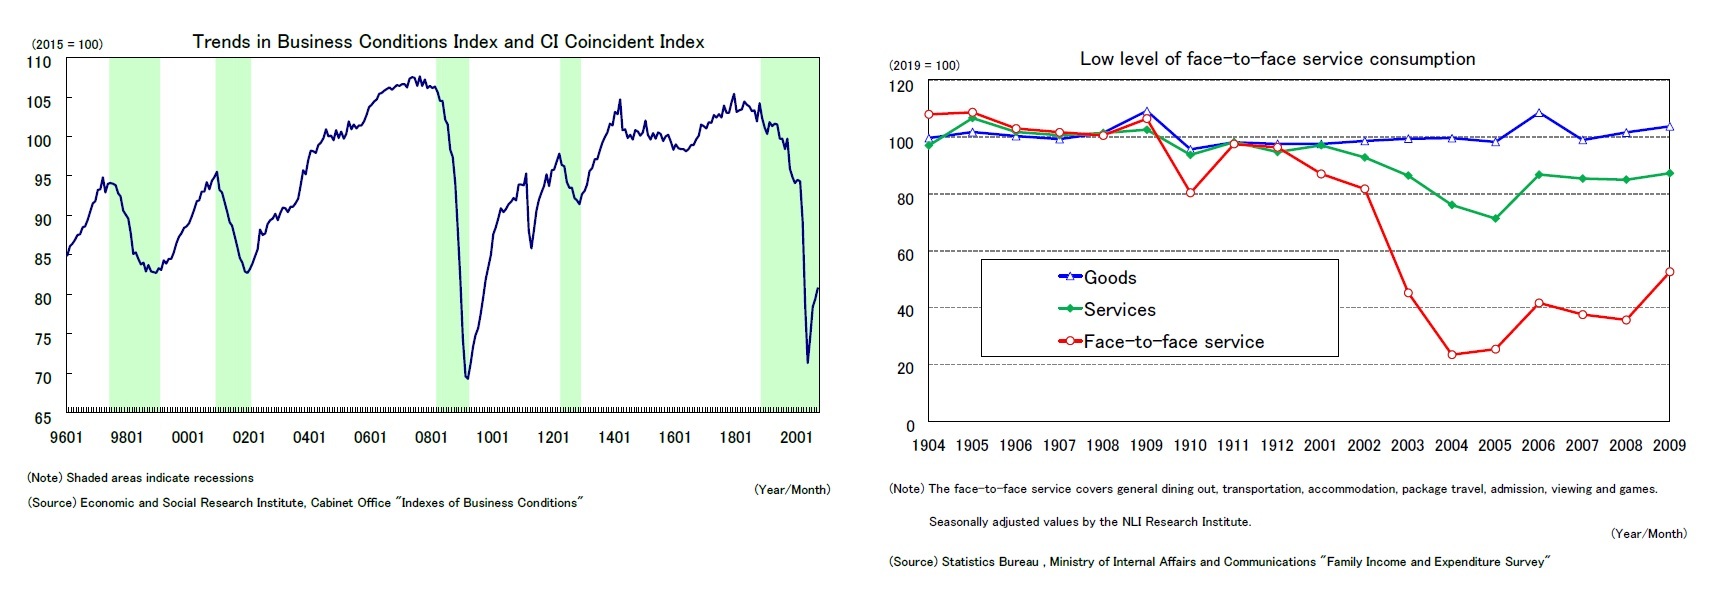 Trends in Business Conditions Index and CI Coincident Index/Low level of face-to-face service consumption